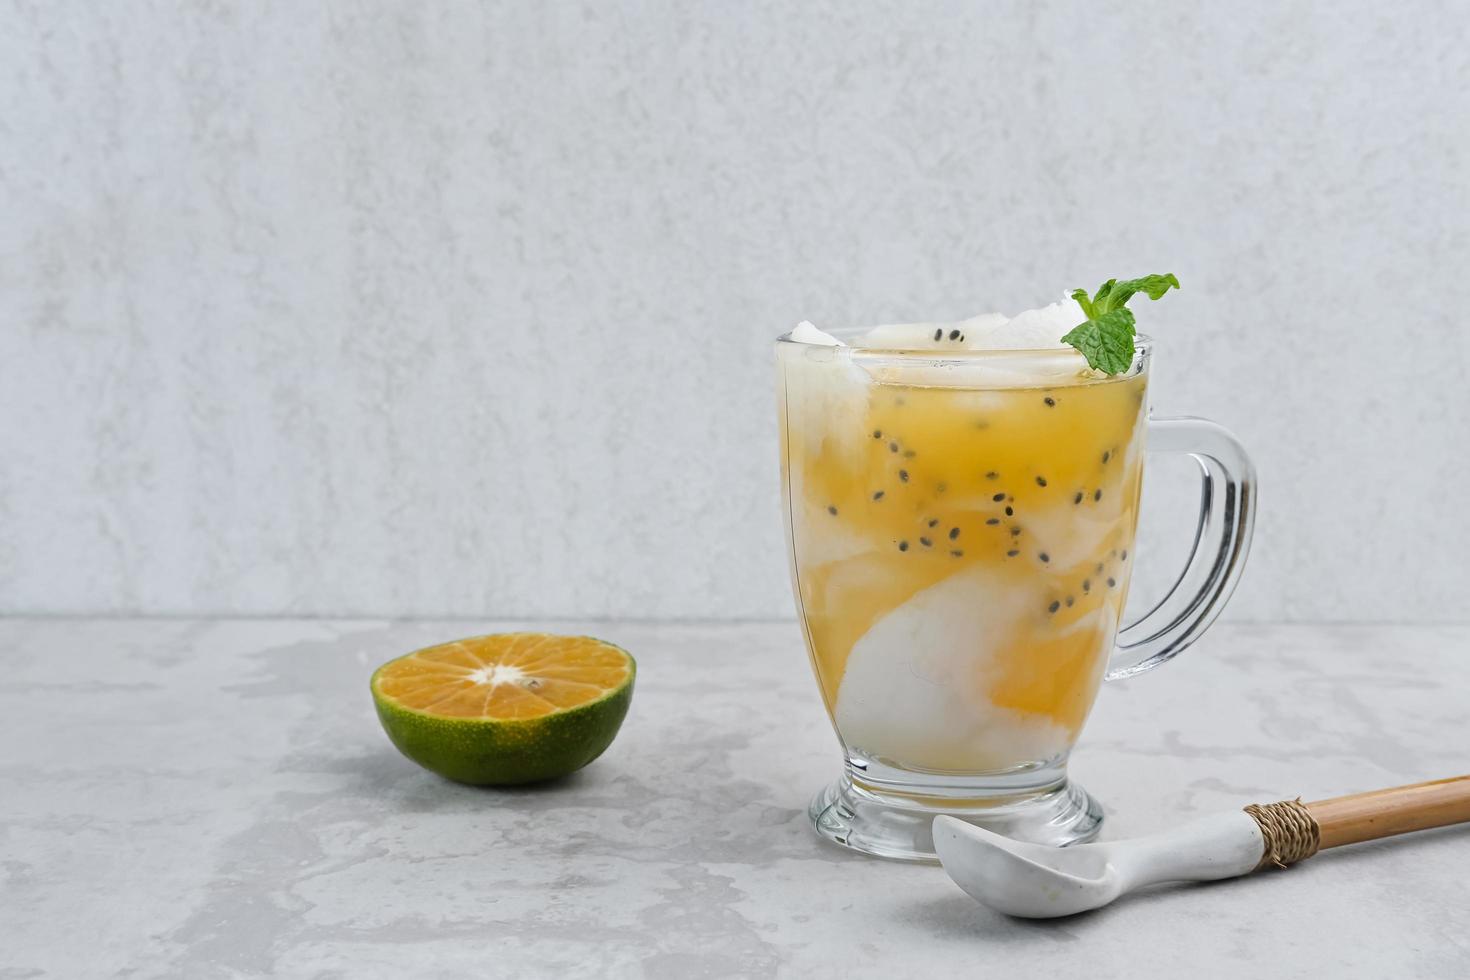 Es Kelapa Jeruk, a typical Indonesian drink made from fresh oranges squeezed with grated young coconut. photo